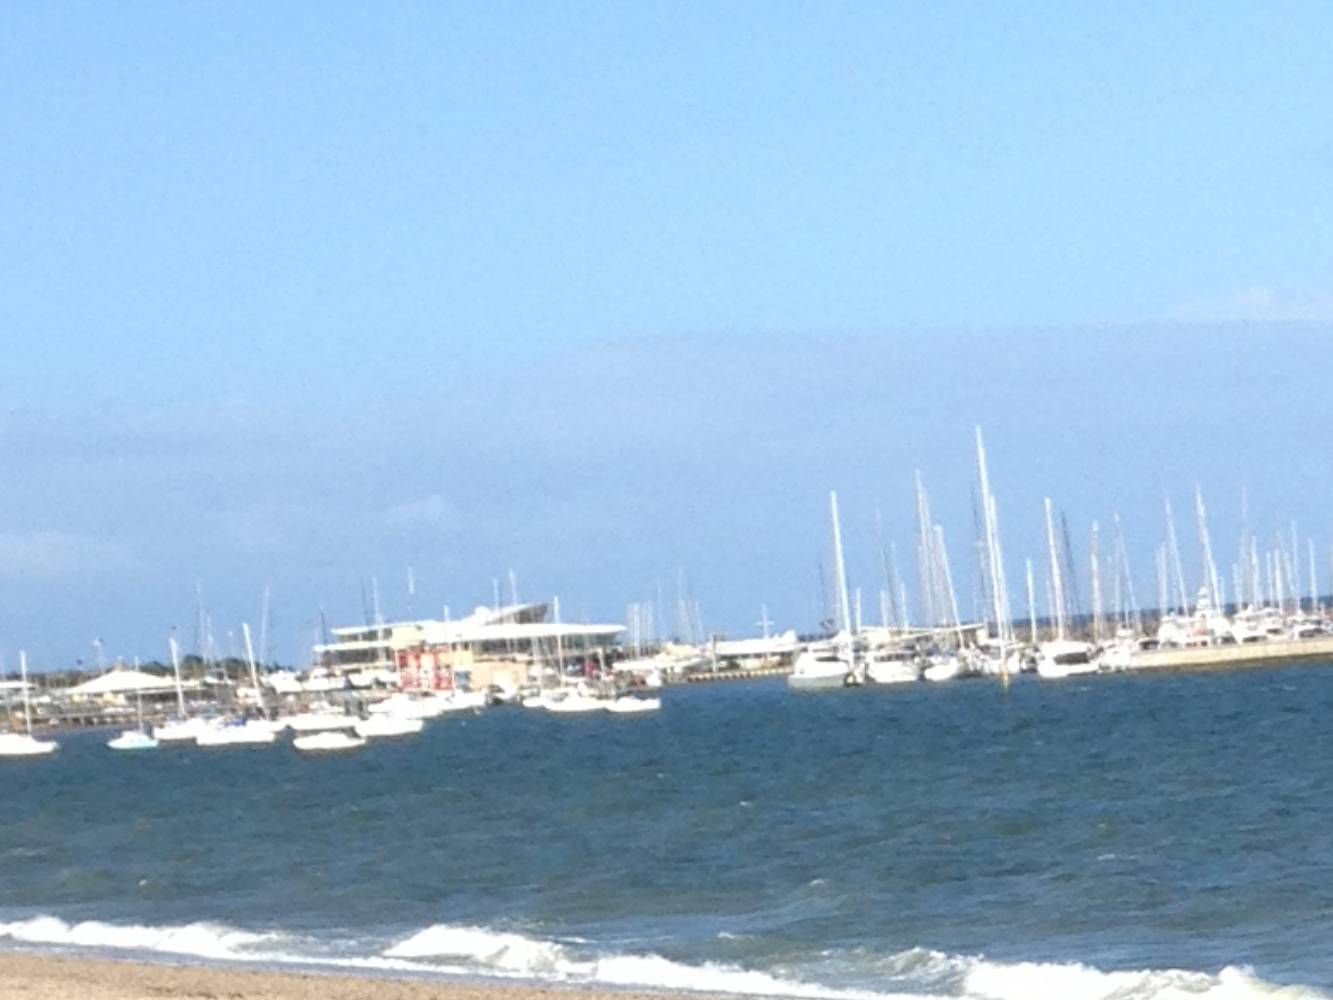 Looking toward the yacht club from the swimming beach